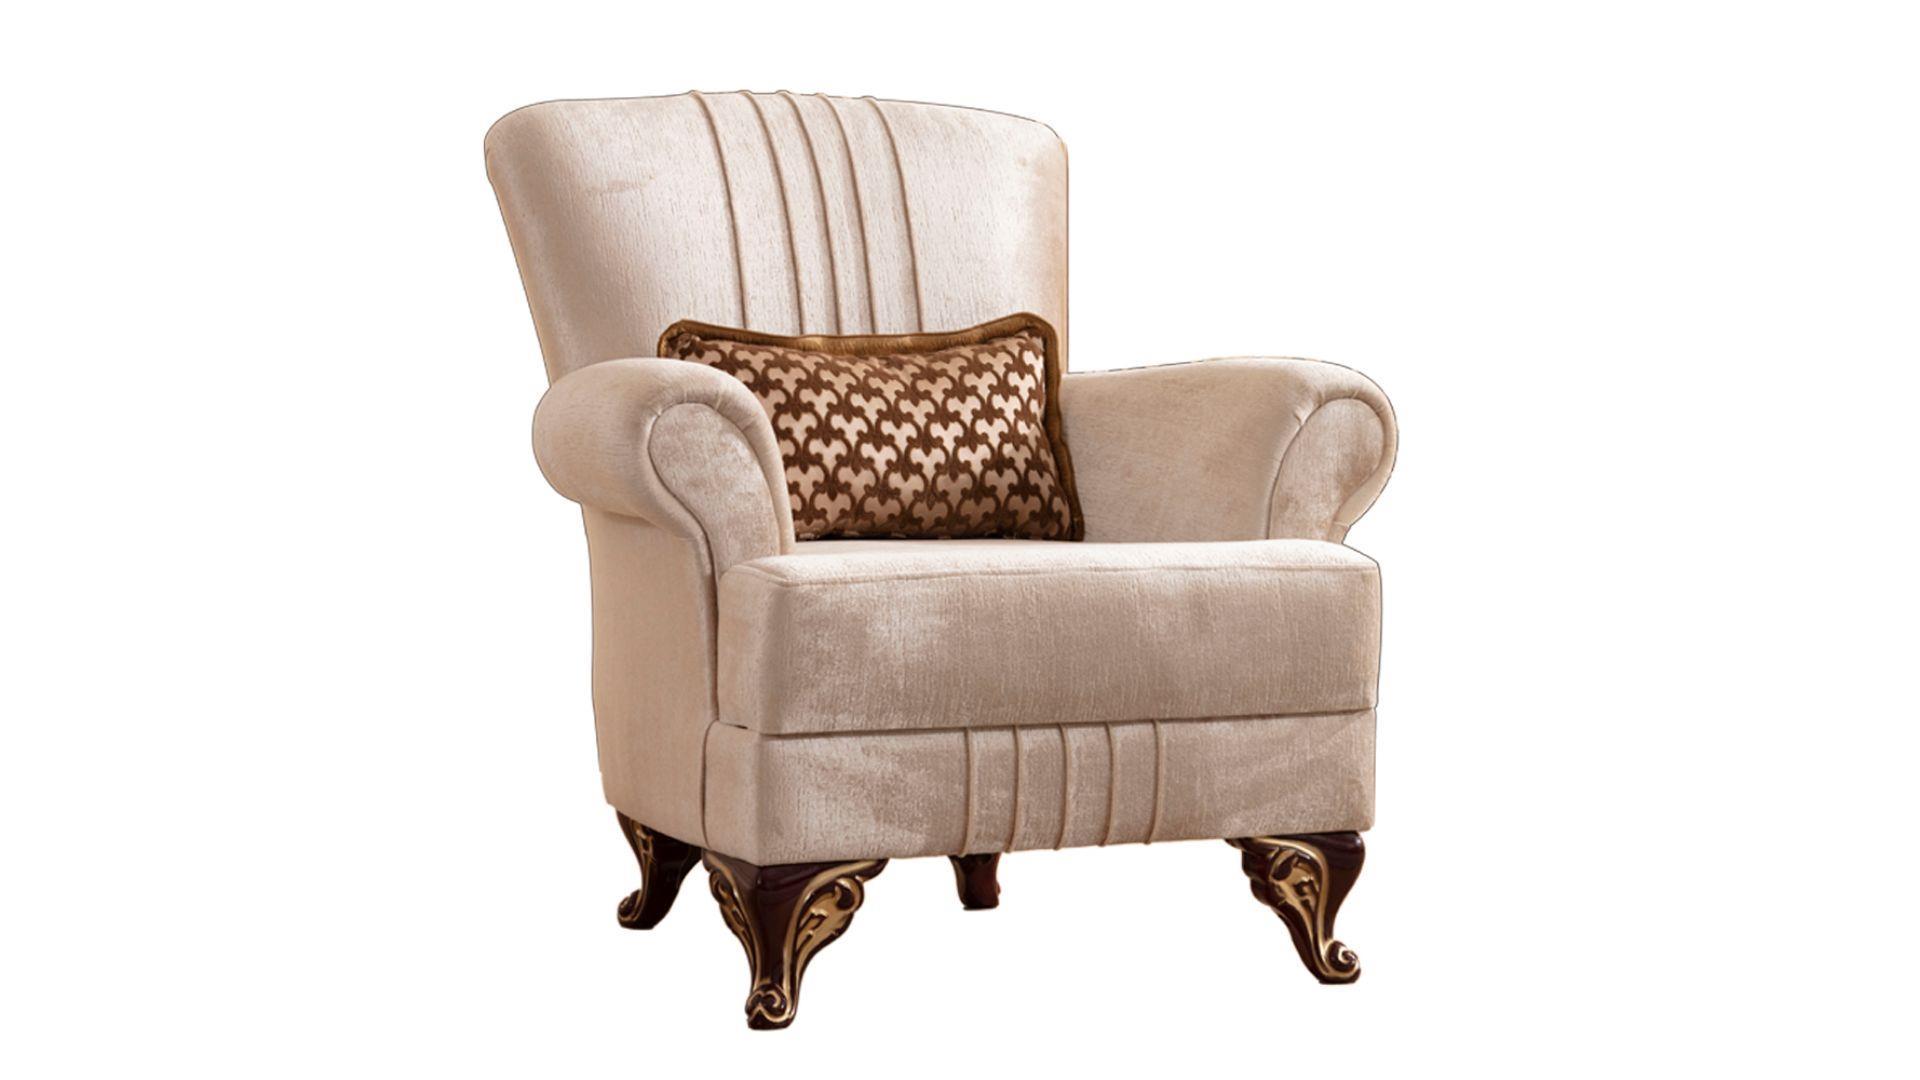 Classic, Traditional Arm Chair CARMEN 698781398920 in Beige Chenille